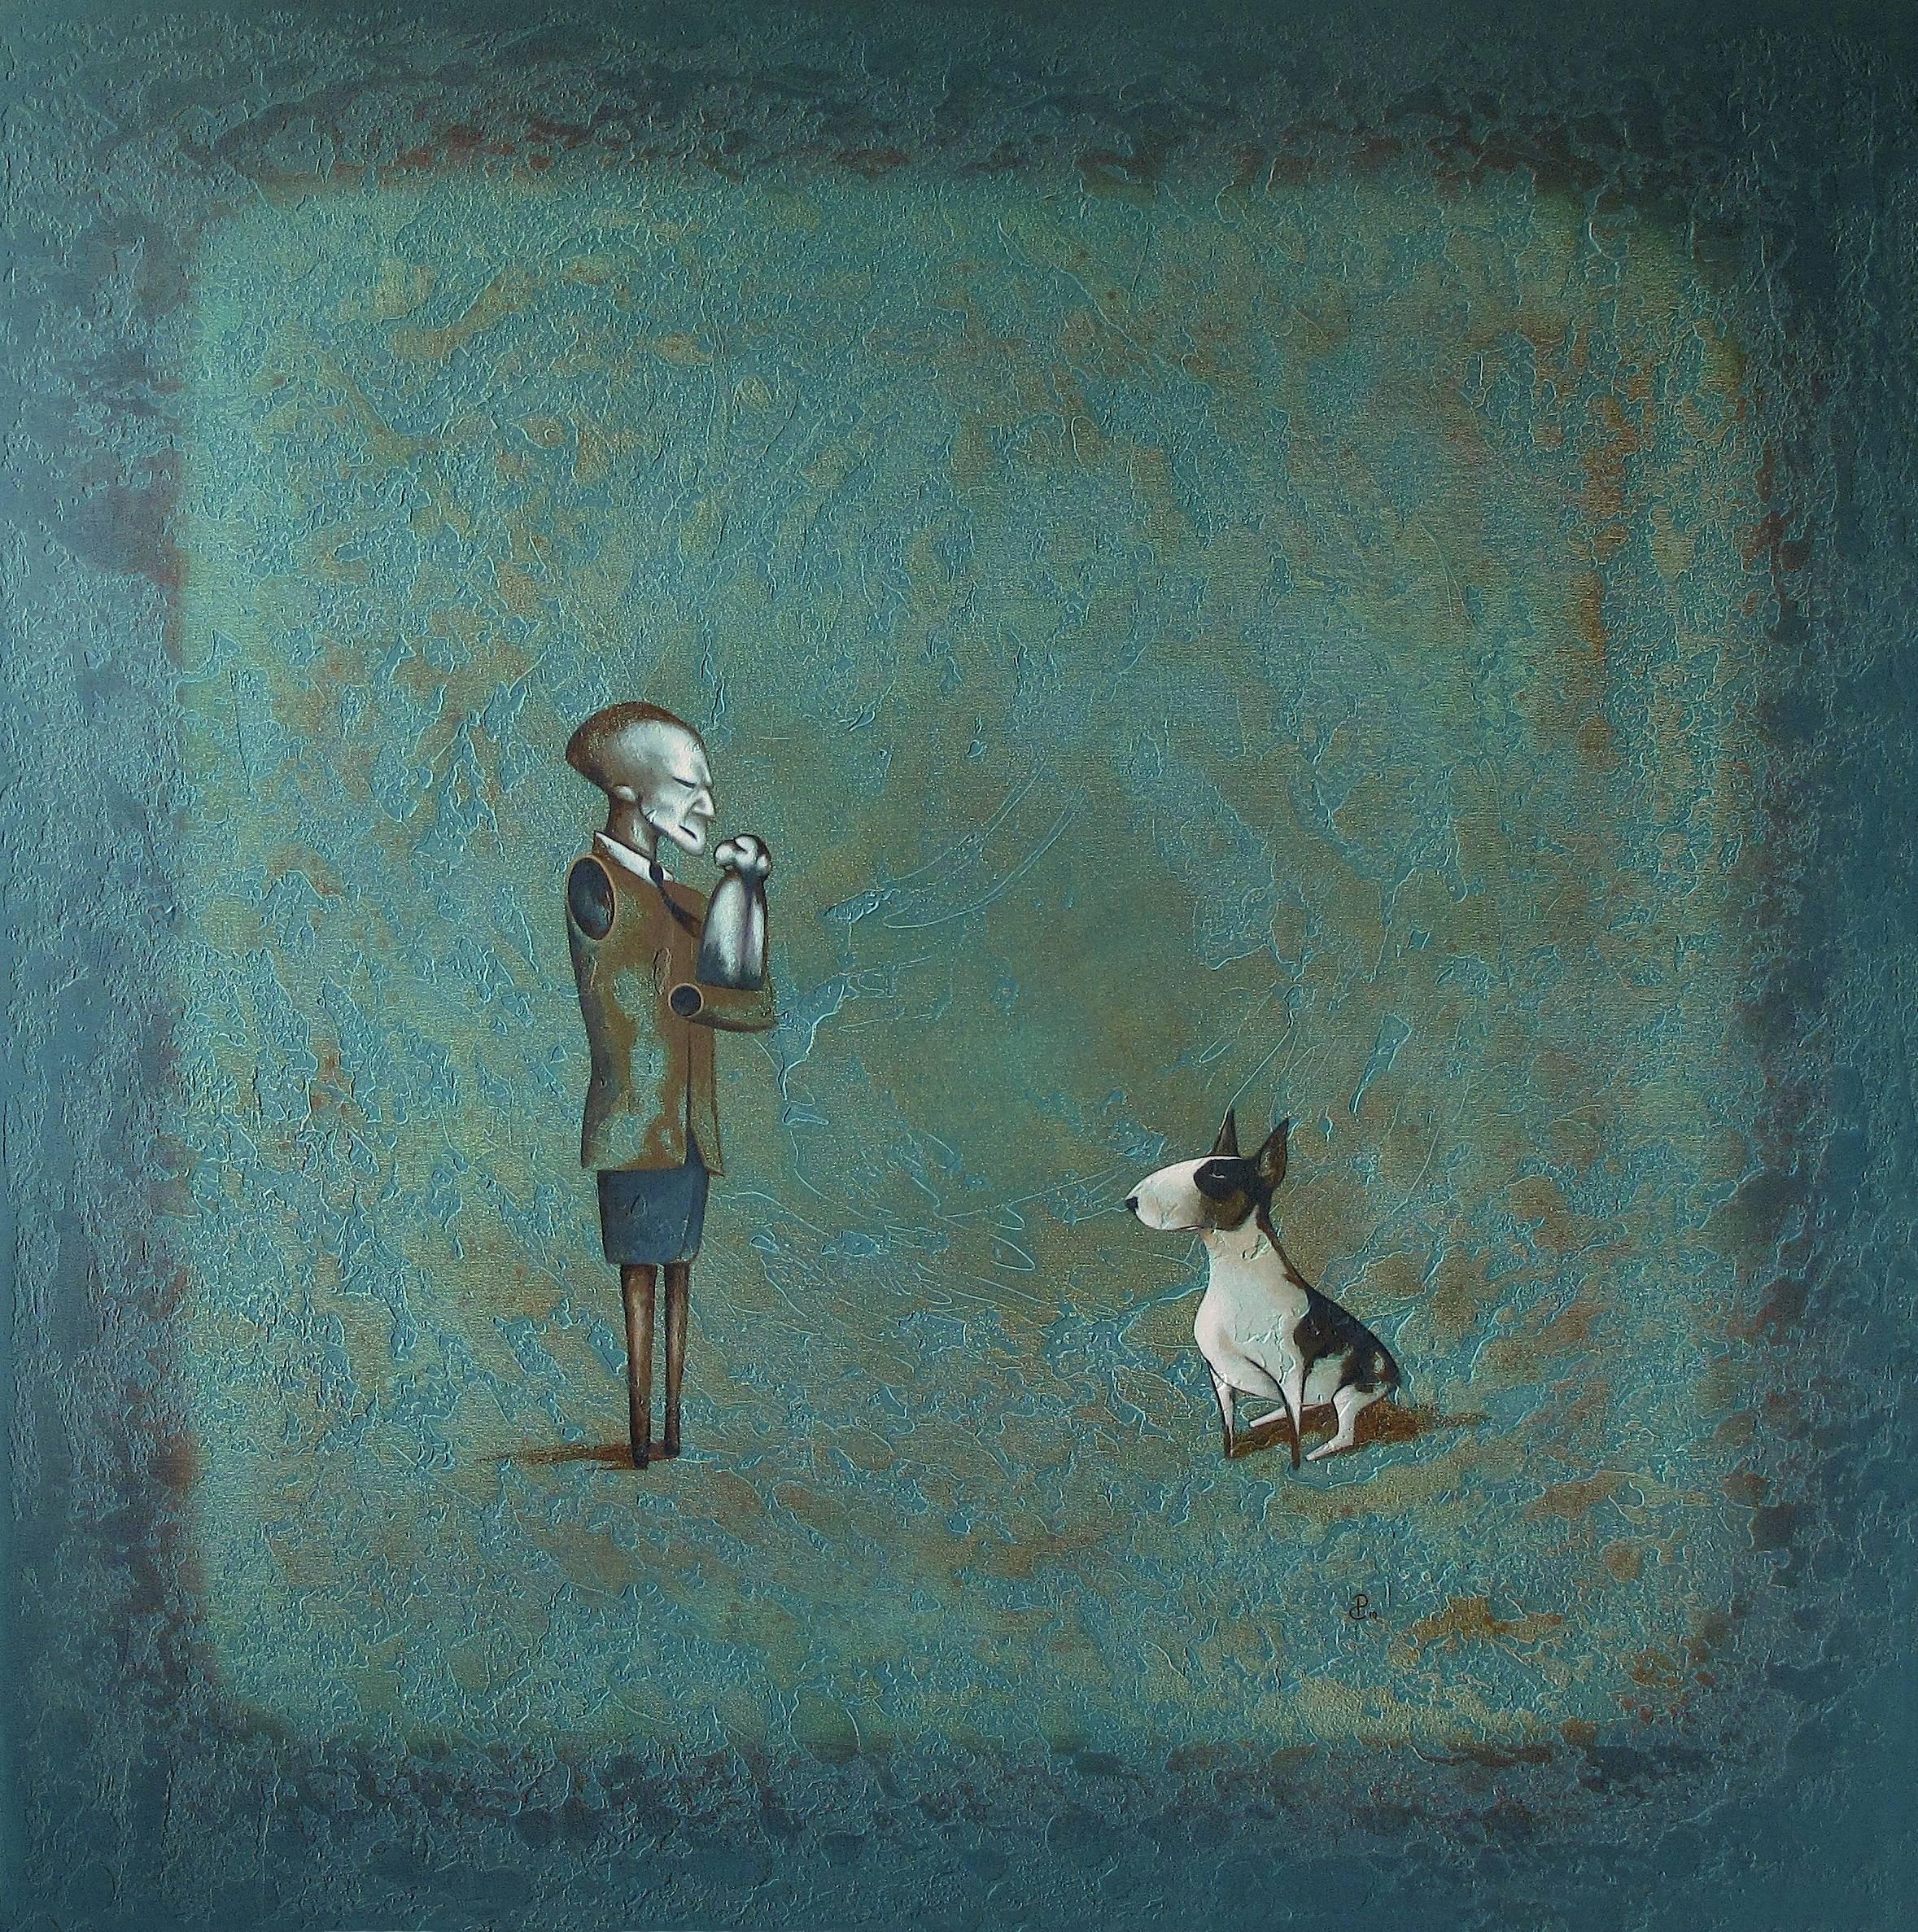 Pablo Caviedes Figurative Painting - "Look at that!" - Acrylic painting, blue tones